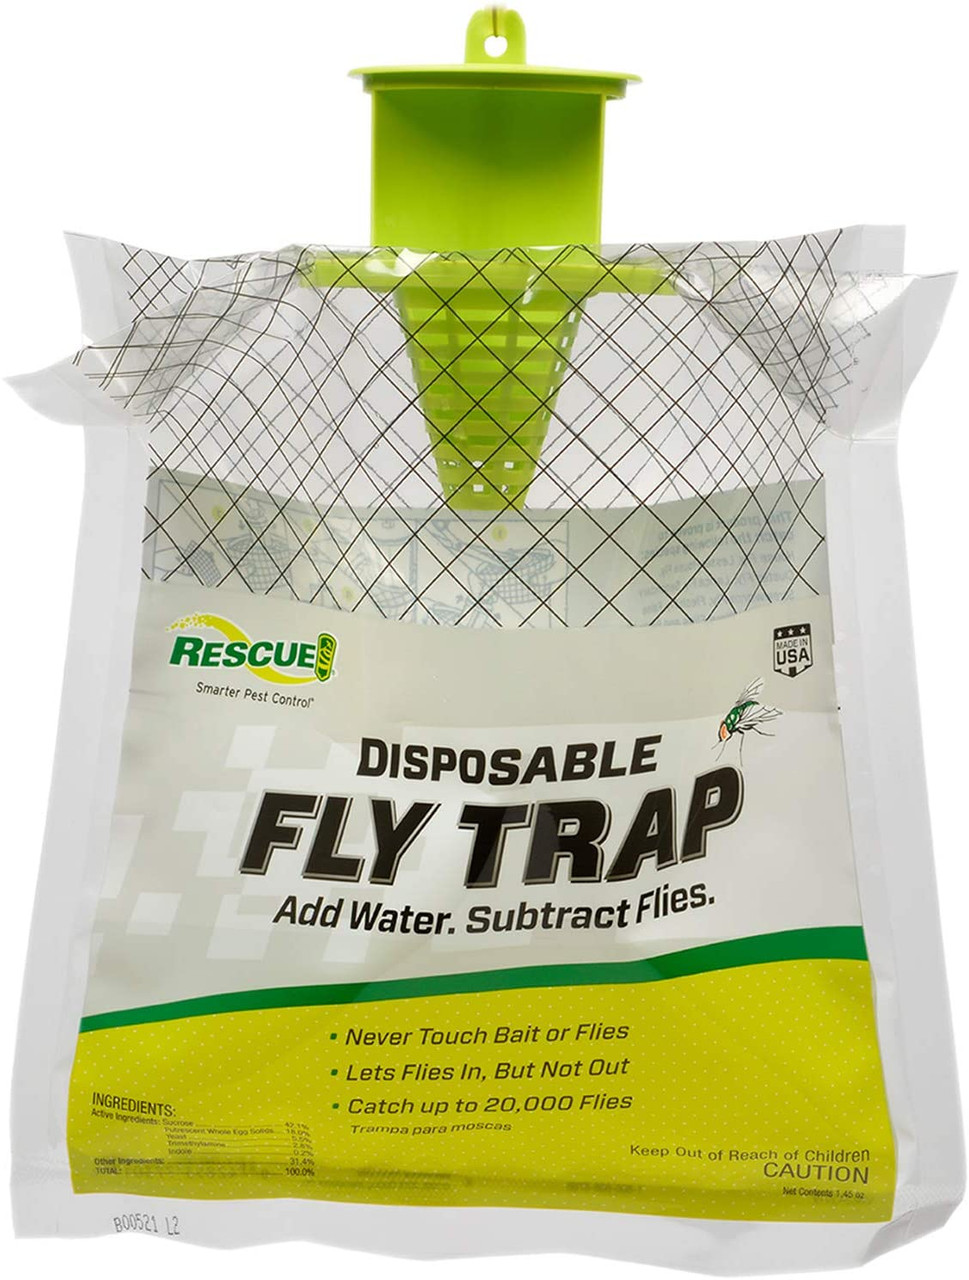 RESCUE! POP! Fly Trap – Large Reusable Fly Trap for Outdoor Use - 3 Pack